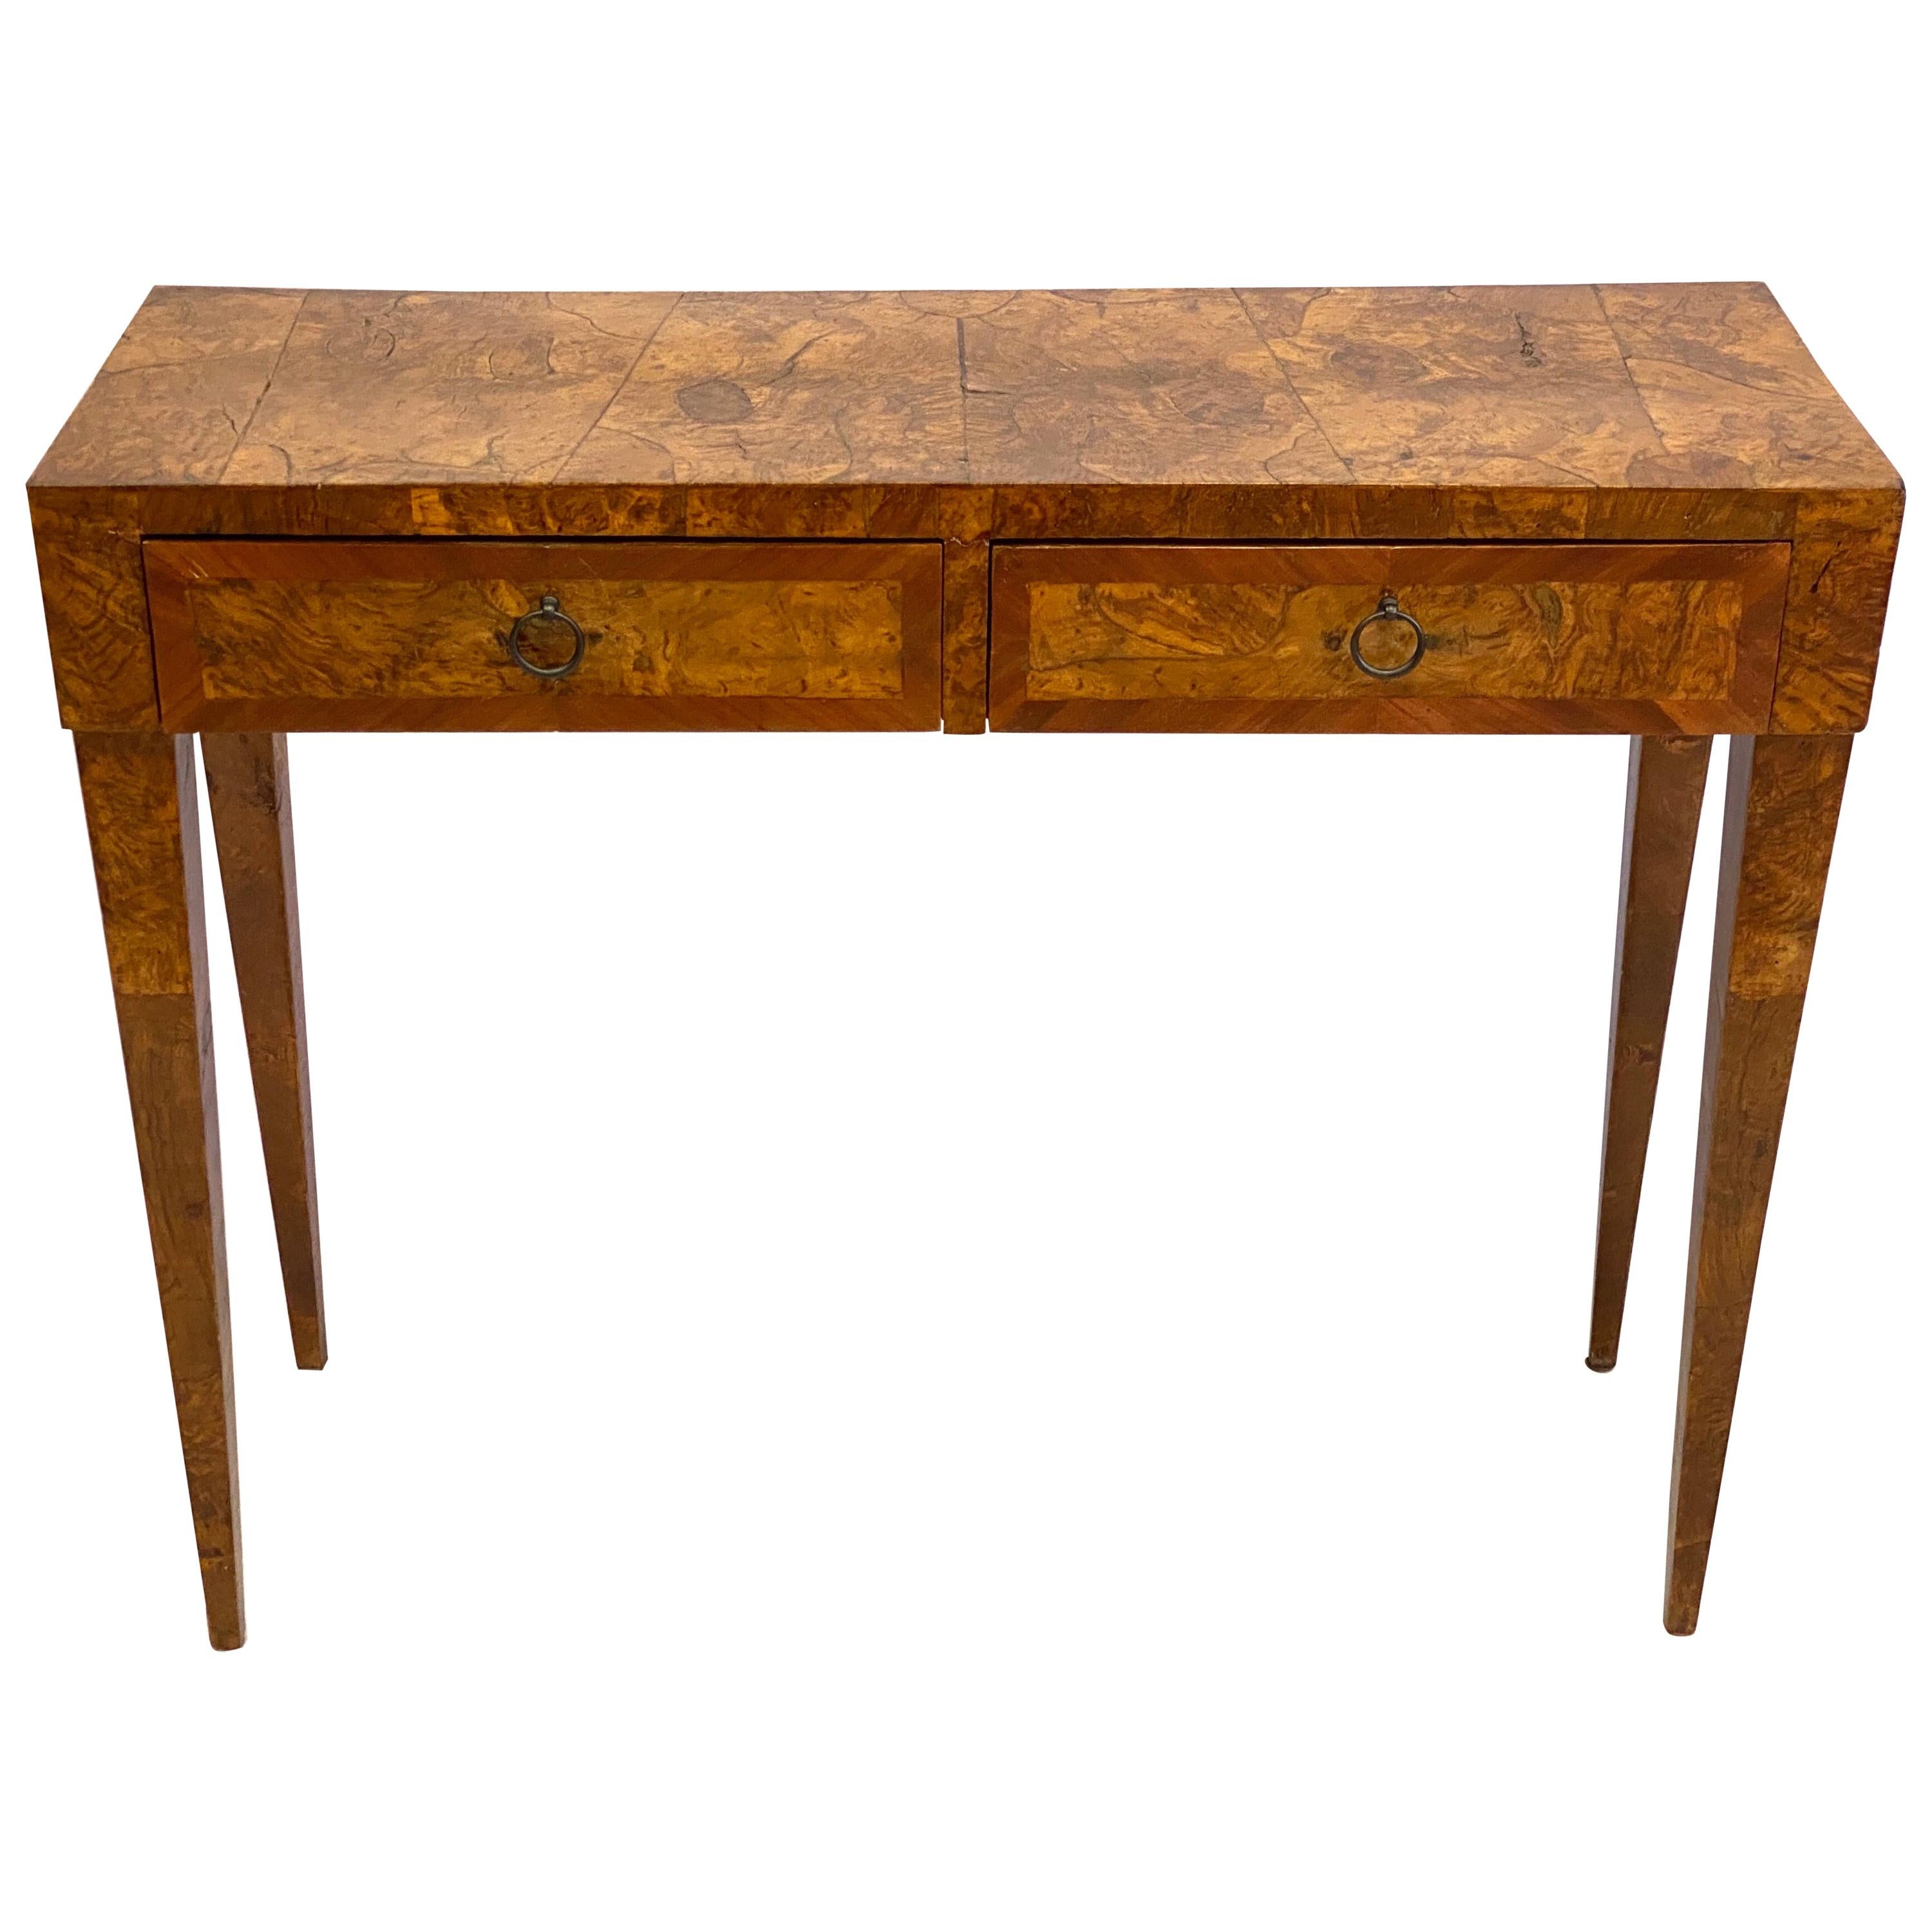 French Modern Neoclassical Fruit Wood Console/ Desk, Circle of Jean-Michel Frank